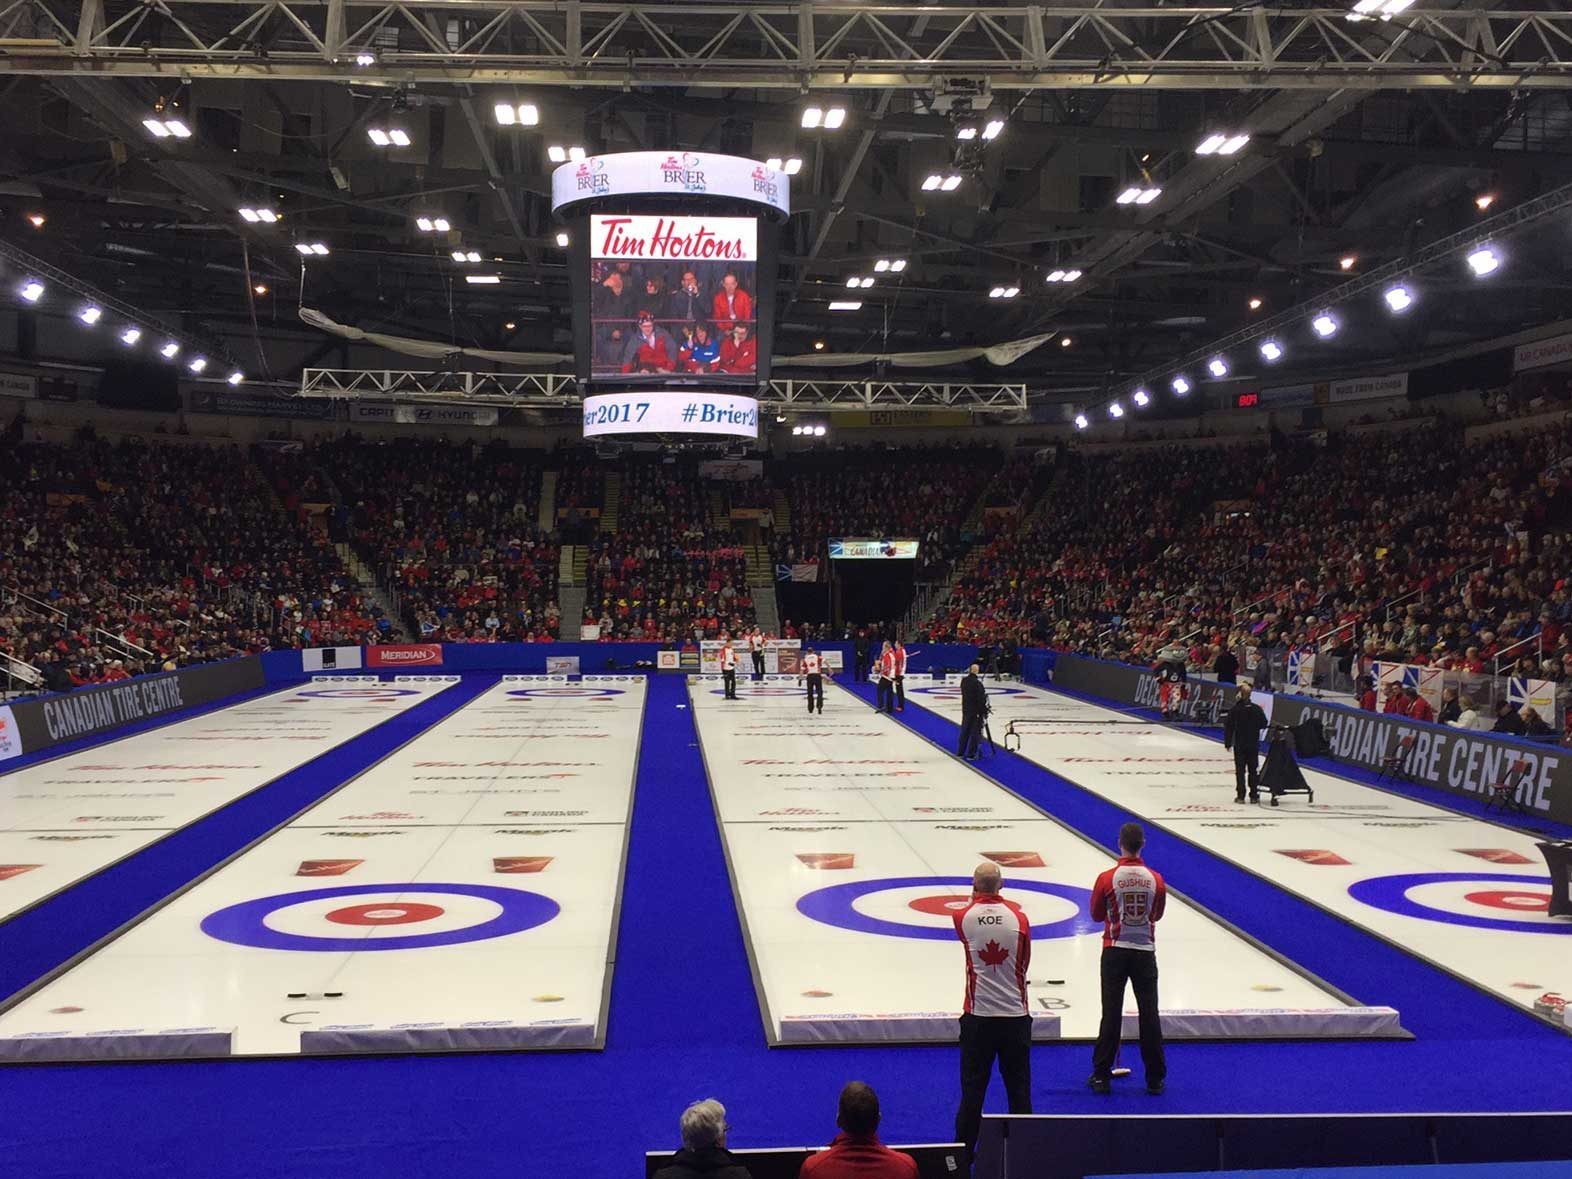 Gushue Grabs Gold at the 2017 Brier